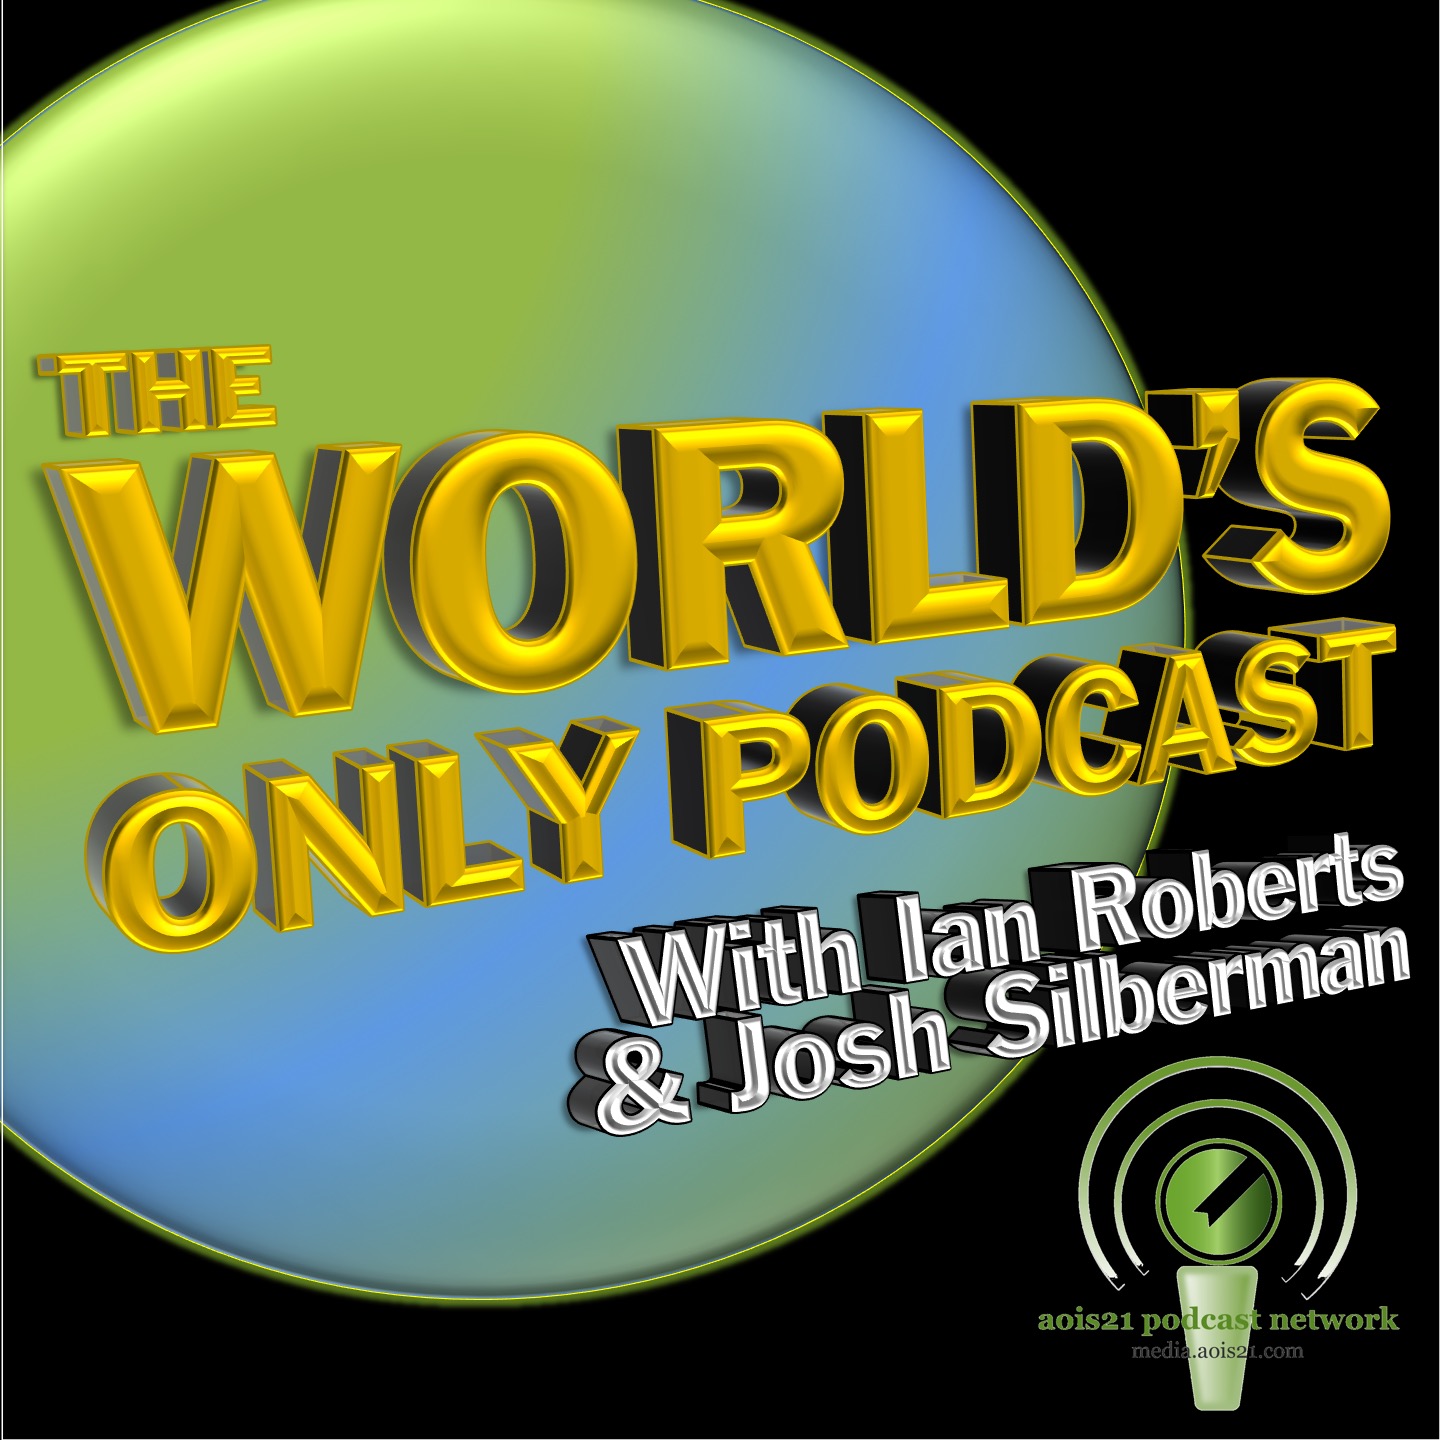 The World's Only Podcast with Ian Roberts and Josh Silberman